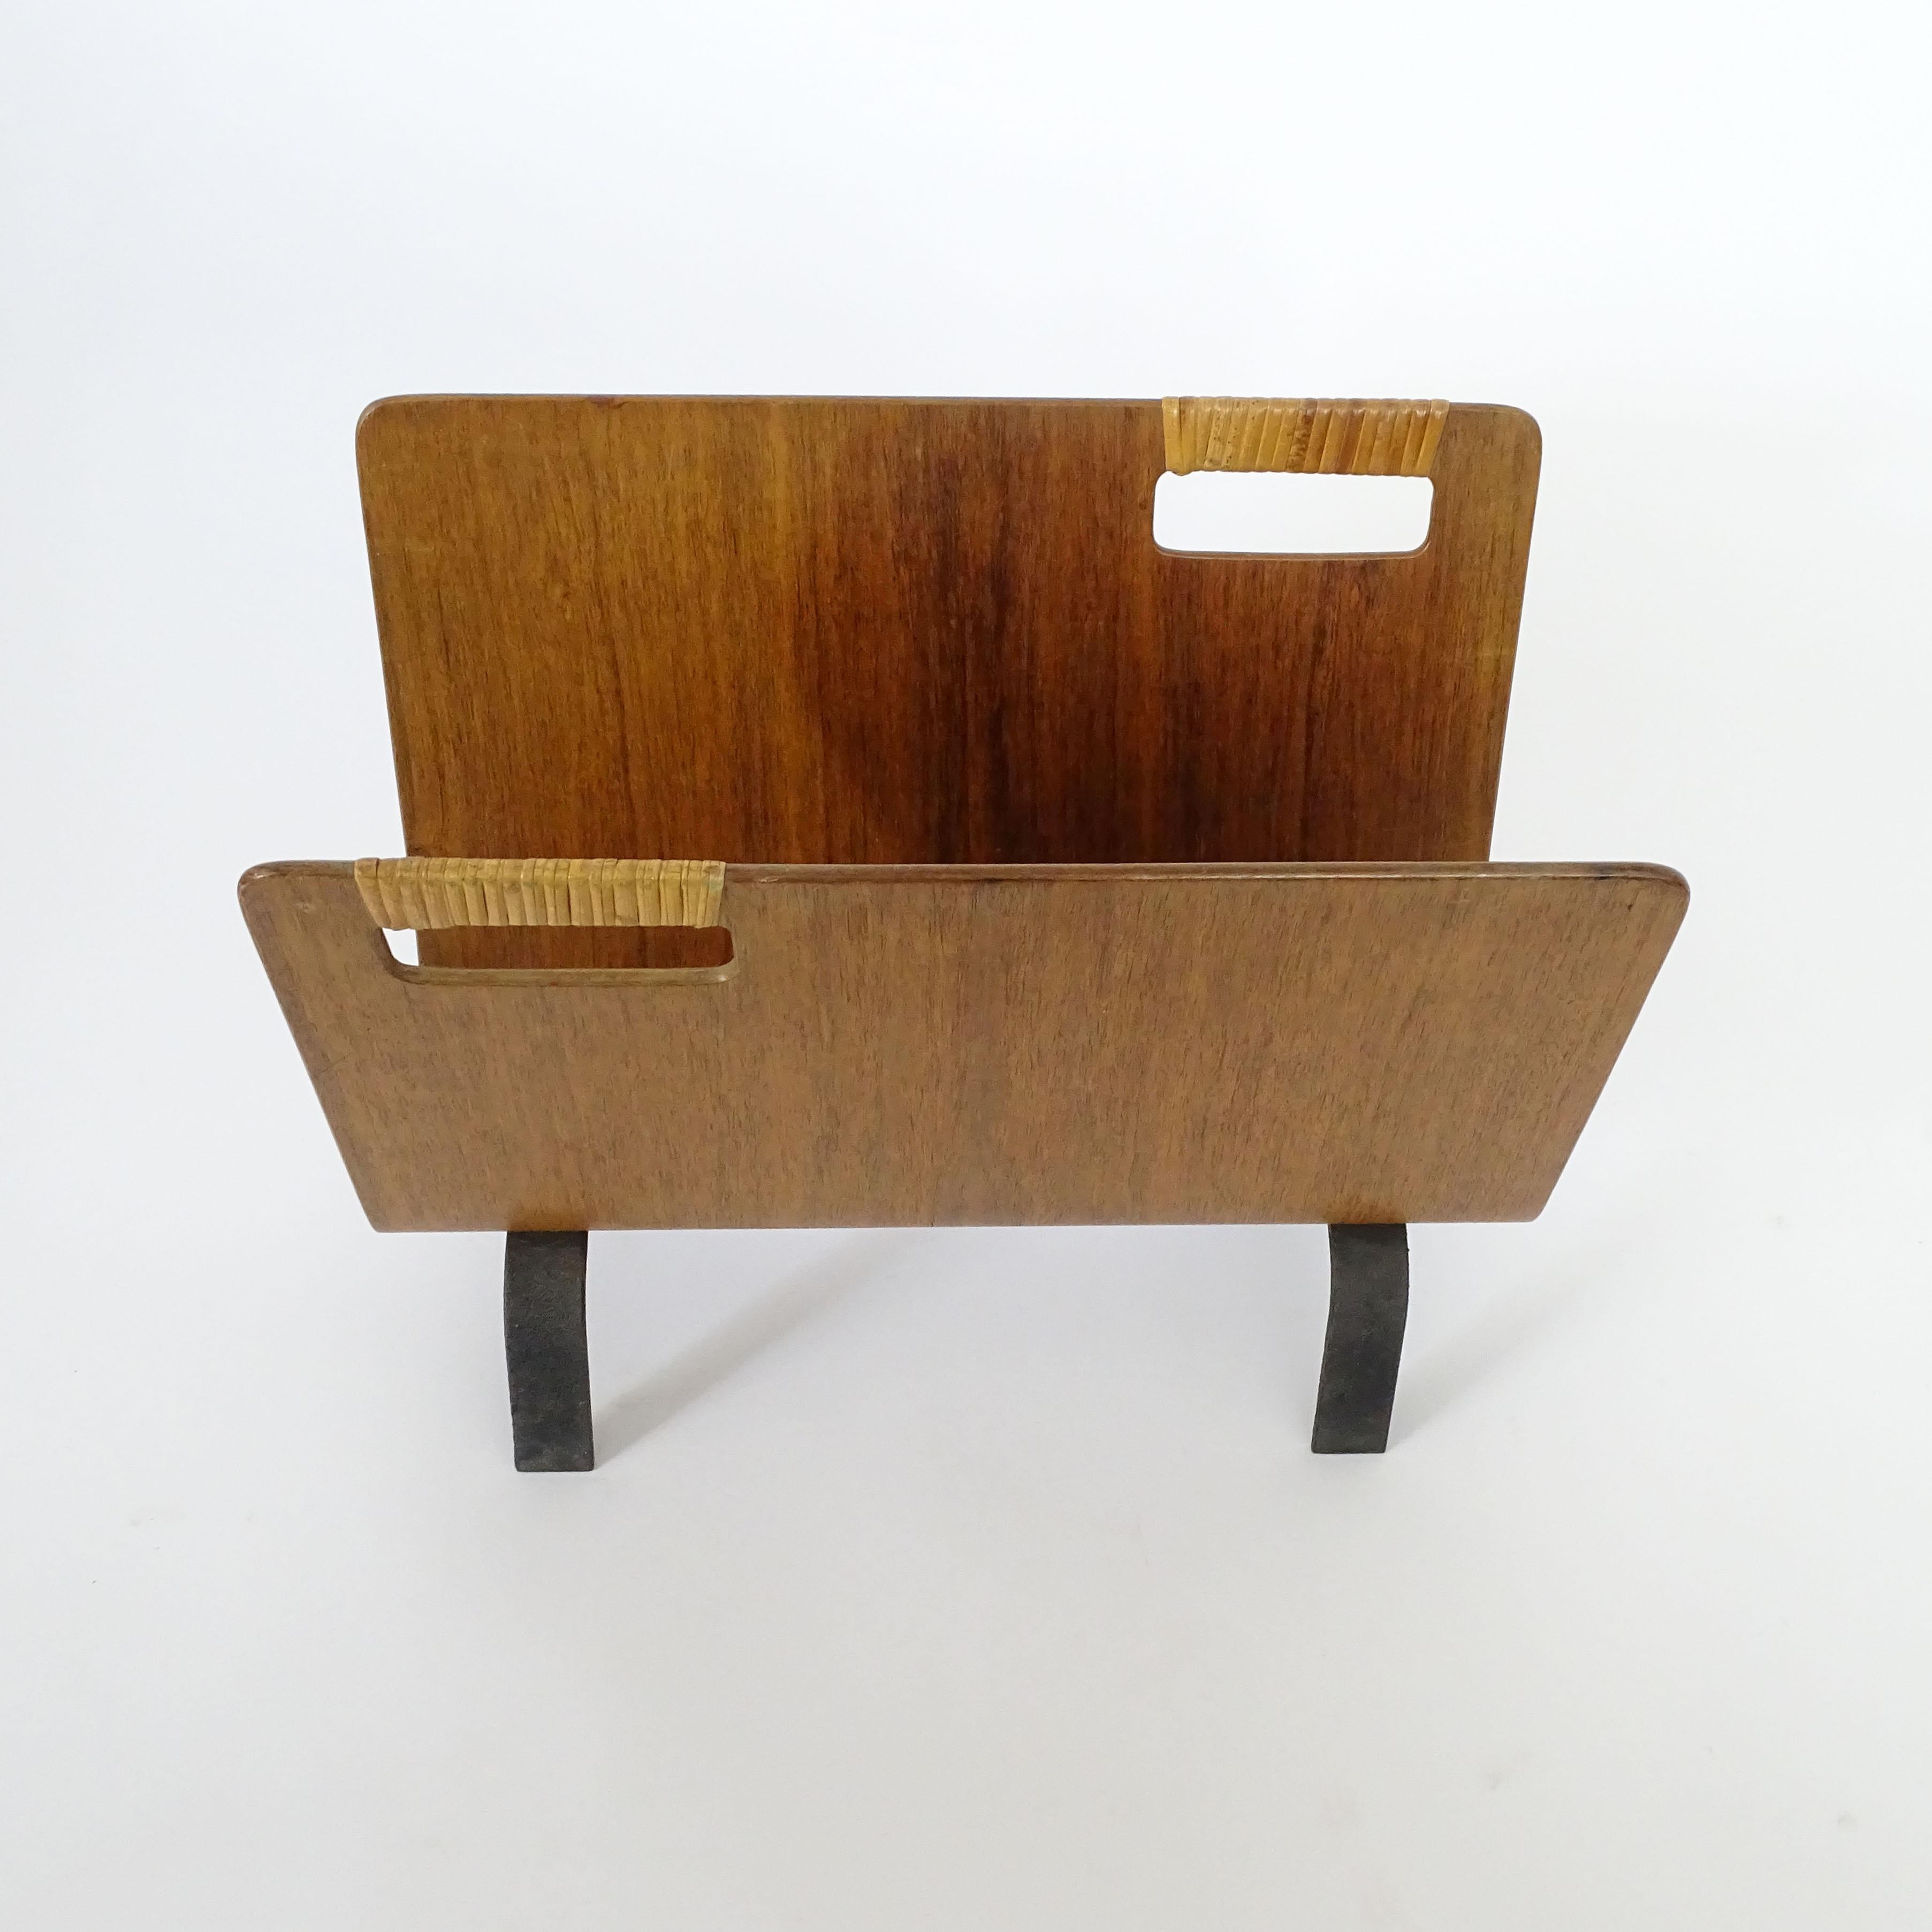 Franco Campo & Carlo Graffi Magazine Rack for Home, Italy, 1950s In Good Condition For Sale In Milan, IT